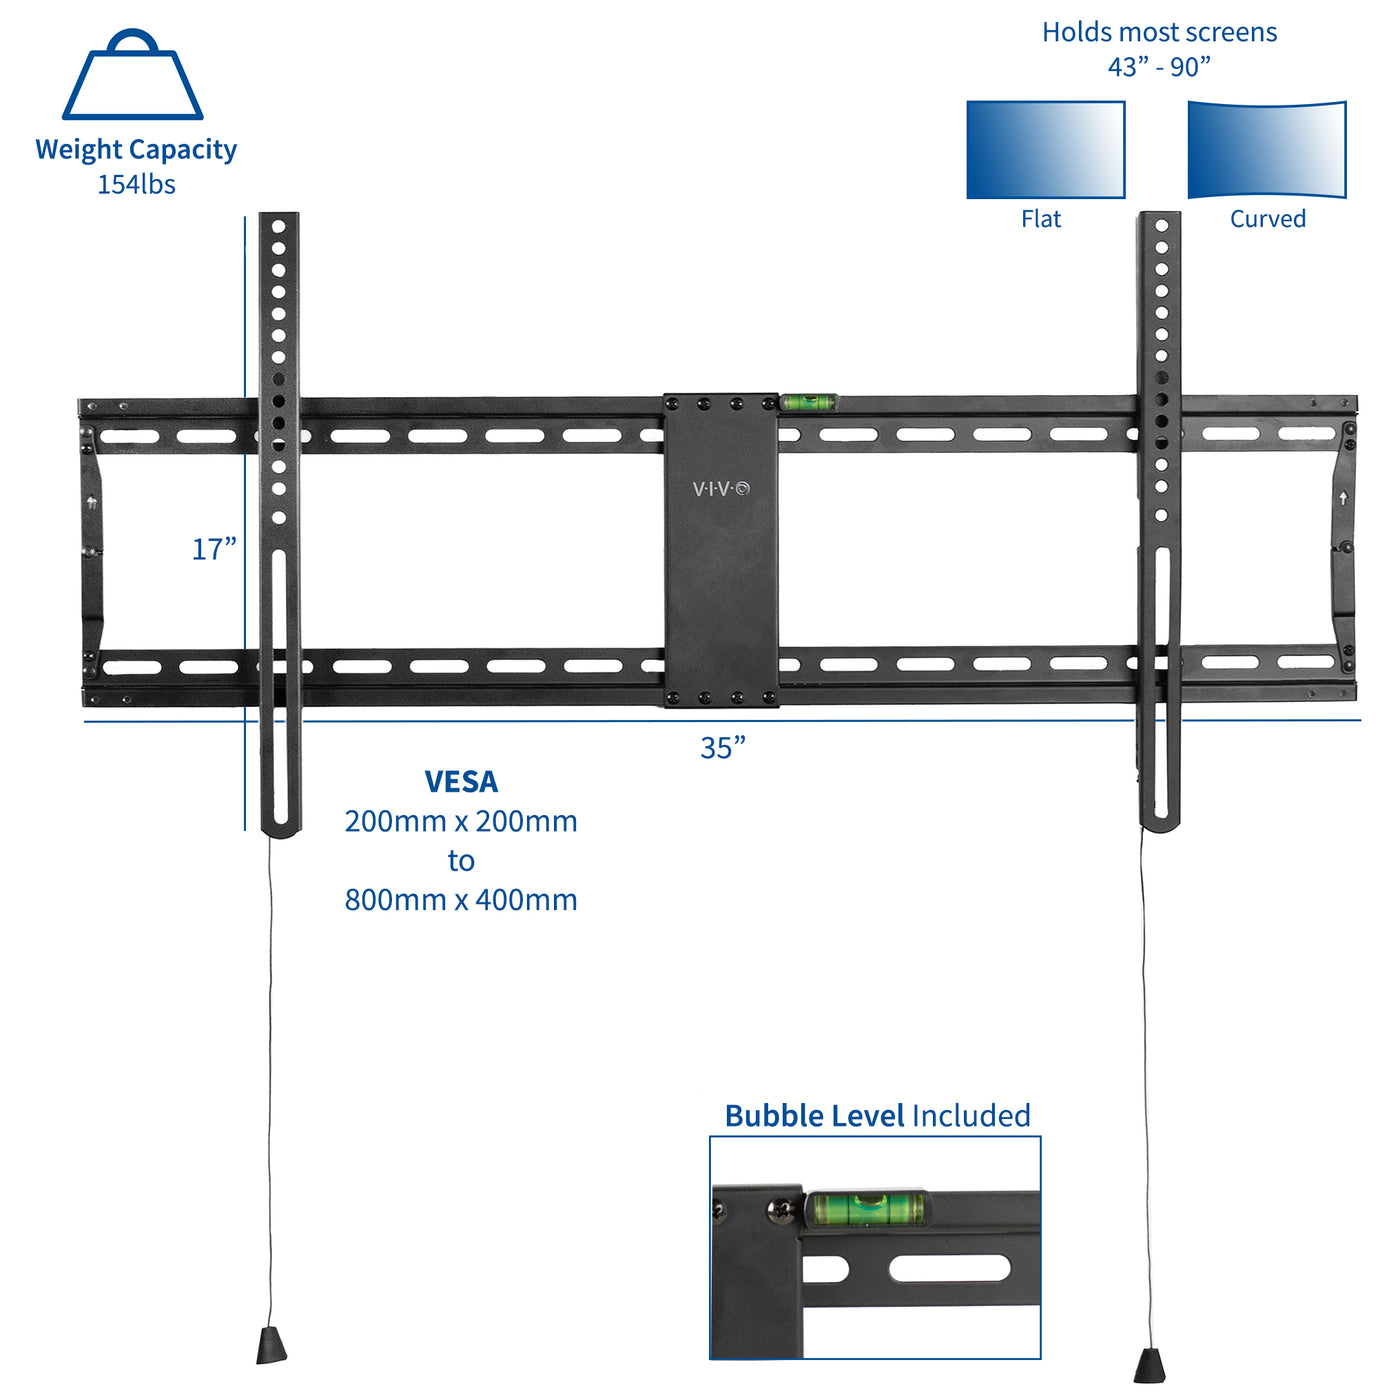 Make sure your TV mount is level with the bubble level included on the frame to ensure levelness.